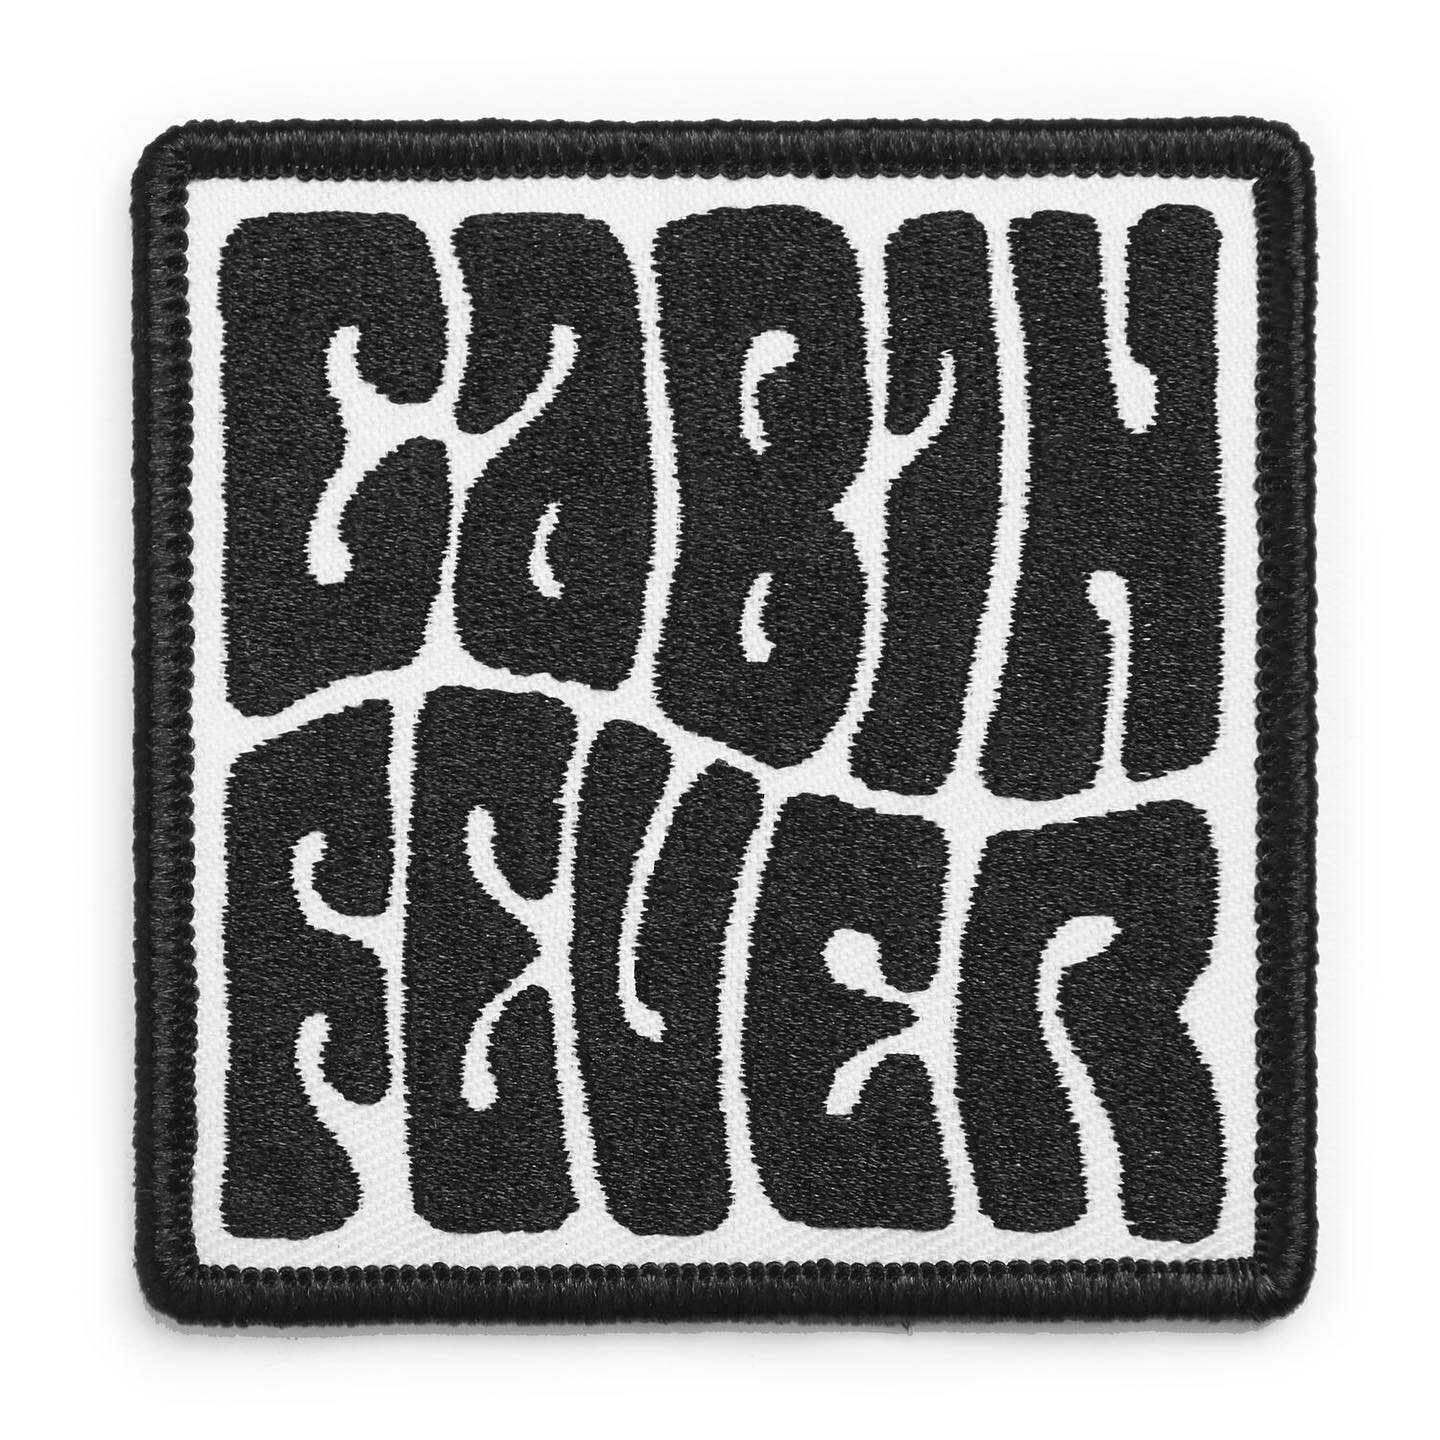 The CABIN FEVER patch is one of a hundred new things we&rsquo;ve added to the store. Because we&rsquo;re all going fucking bonkers at home, and getting drunk on zoom calls is all we have left.
www.deathpatches.com.au
#deathpatches #cabinfever #wfh